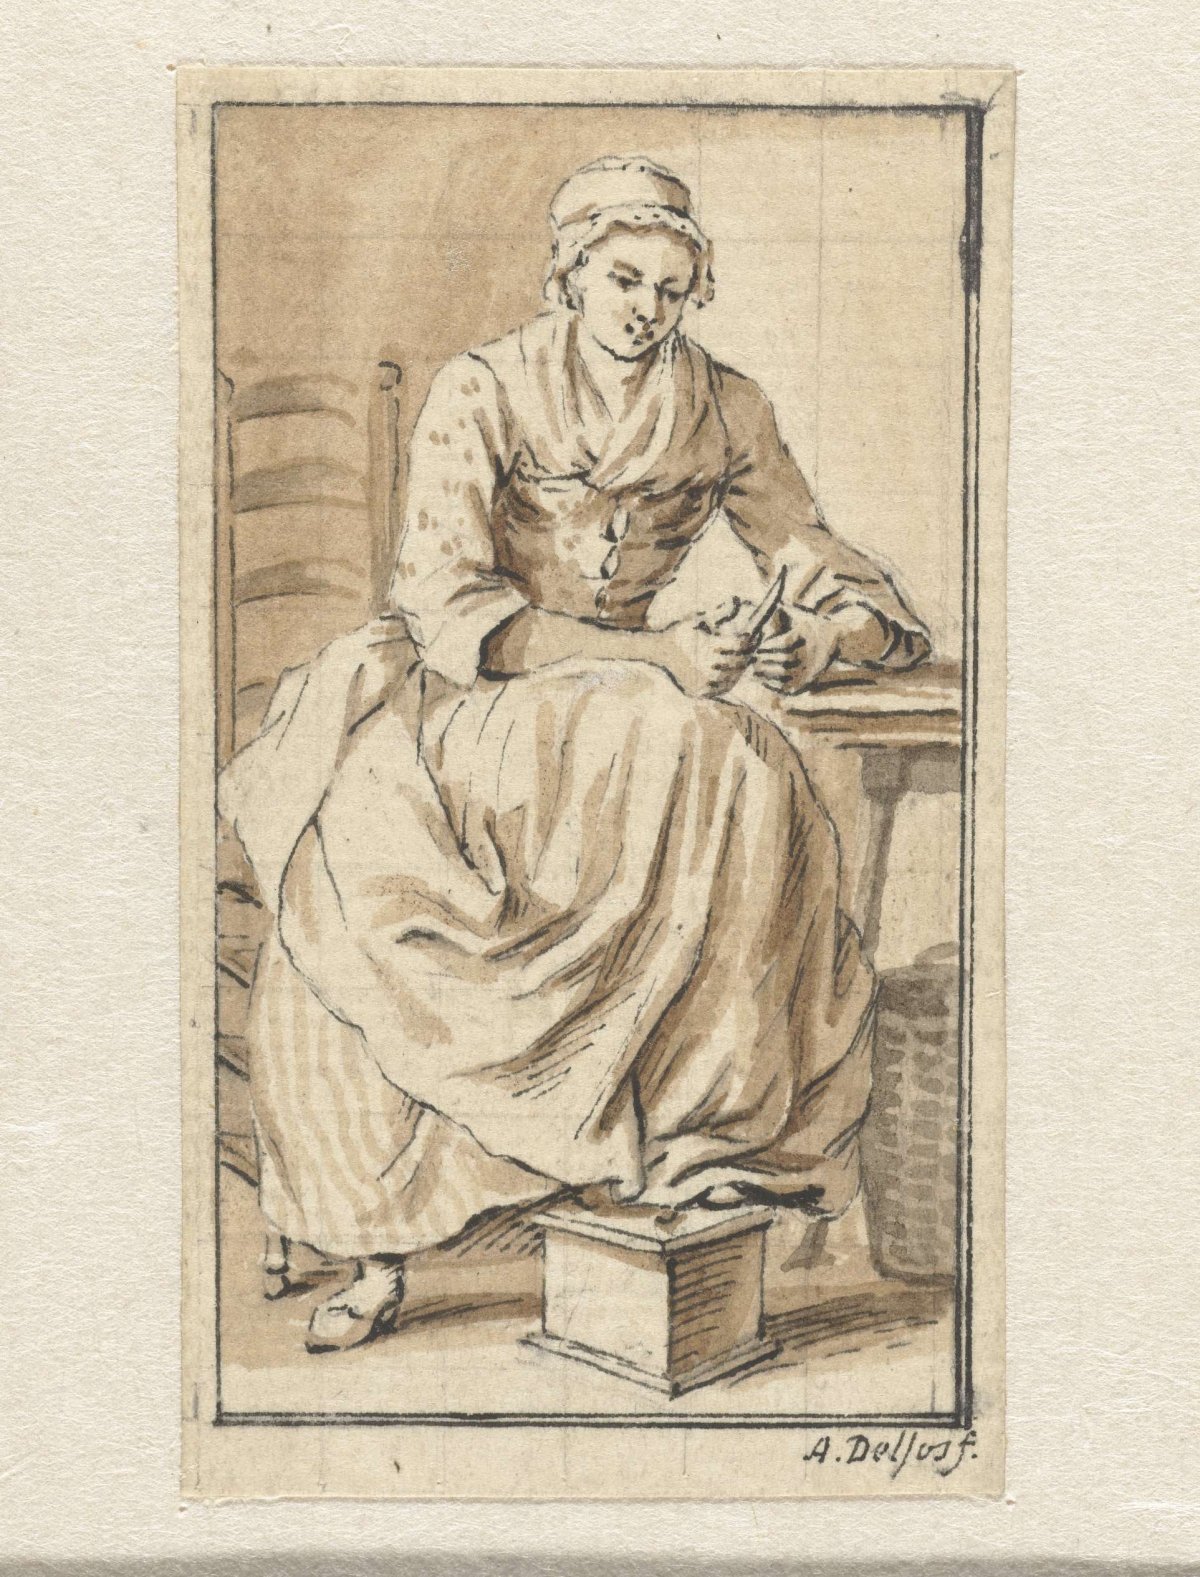 Seated, shouldering woman, Abraham Delfos, 1741 - 1820